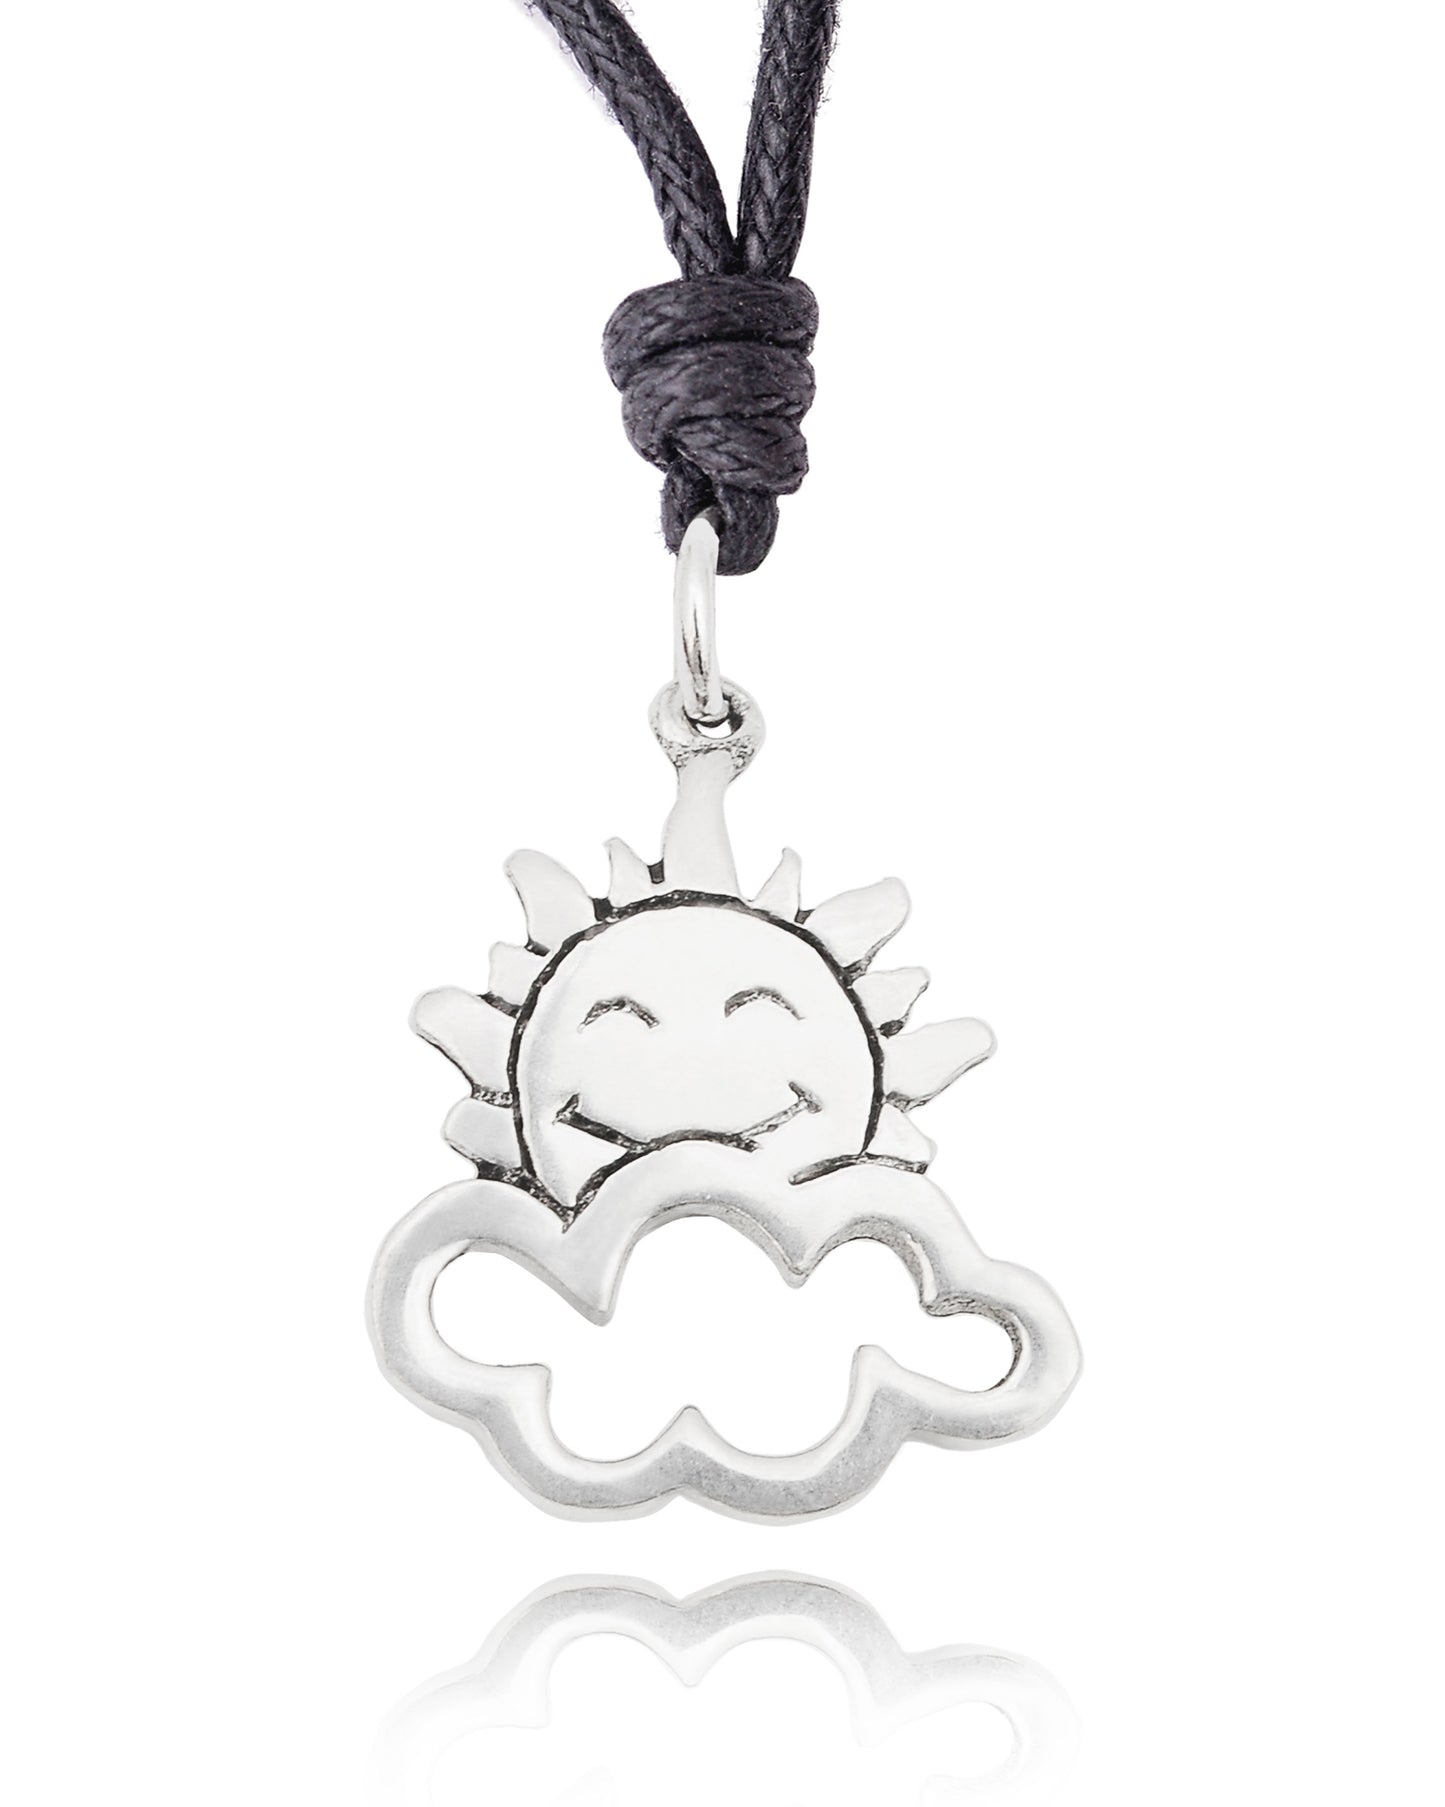 Sun Rises Silver Pewter Charm Necklace Pendant Jewelry